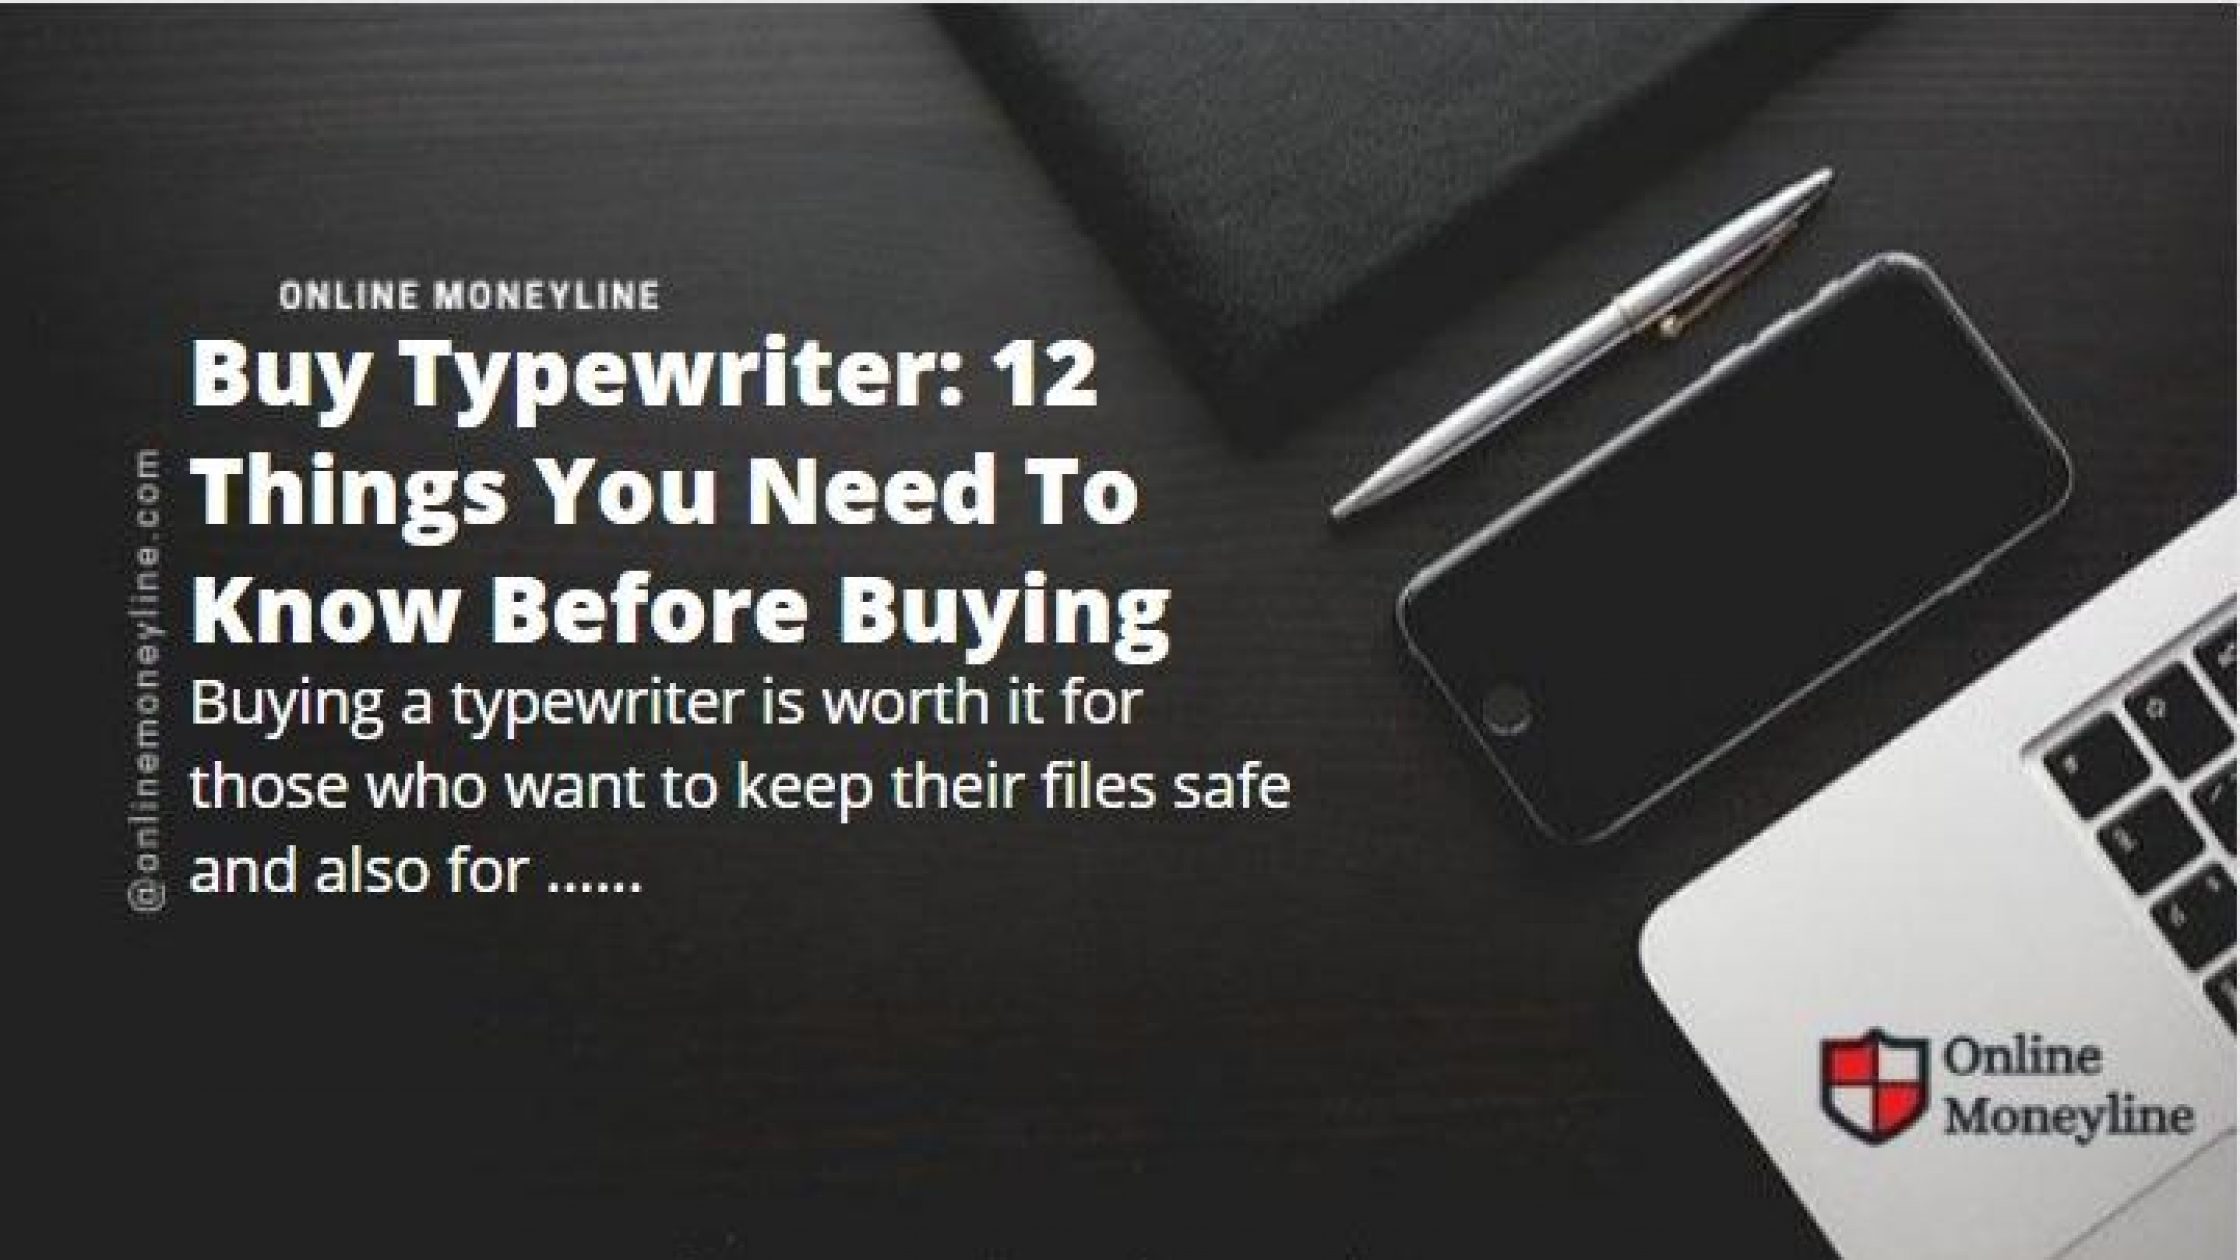 Buy Typewriter: 12 Things You Need To Know Before Buying